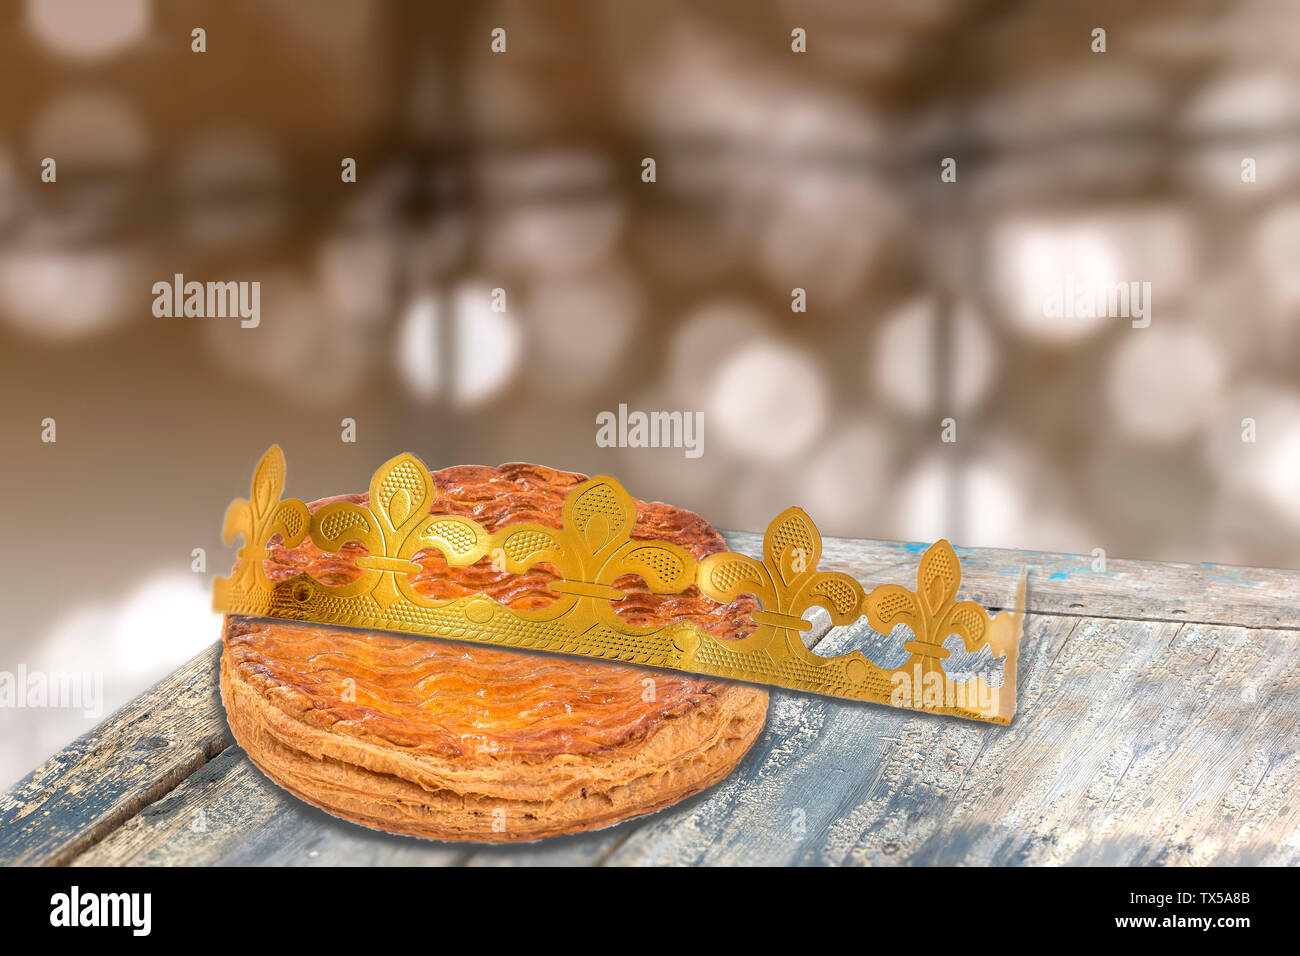 Galette des rois, french kingcake with a golden crown, on wooden table ,epiphany cake against blury light Stock Photo